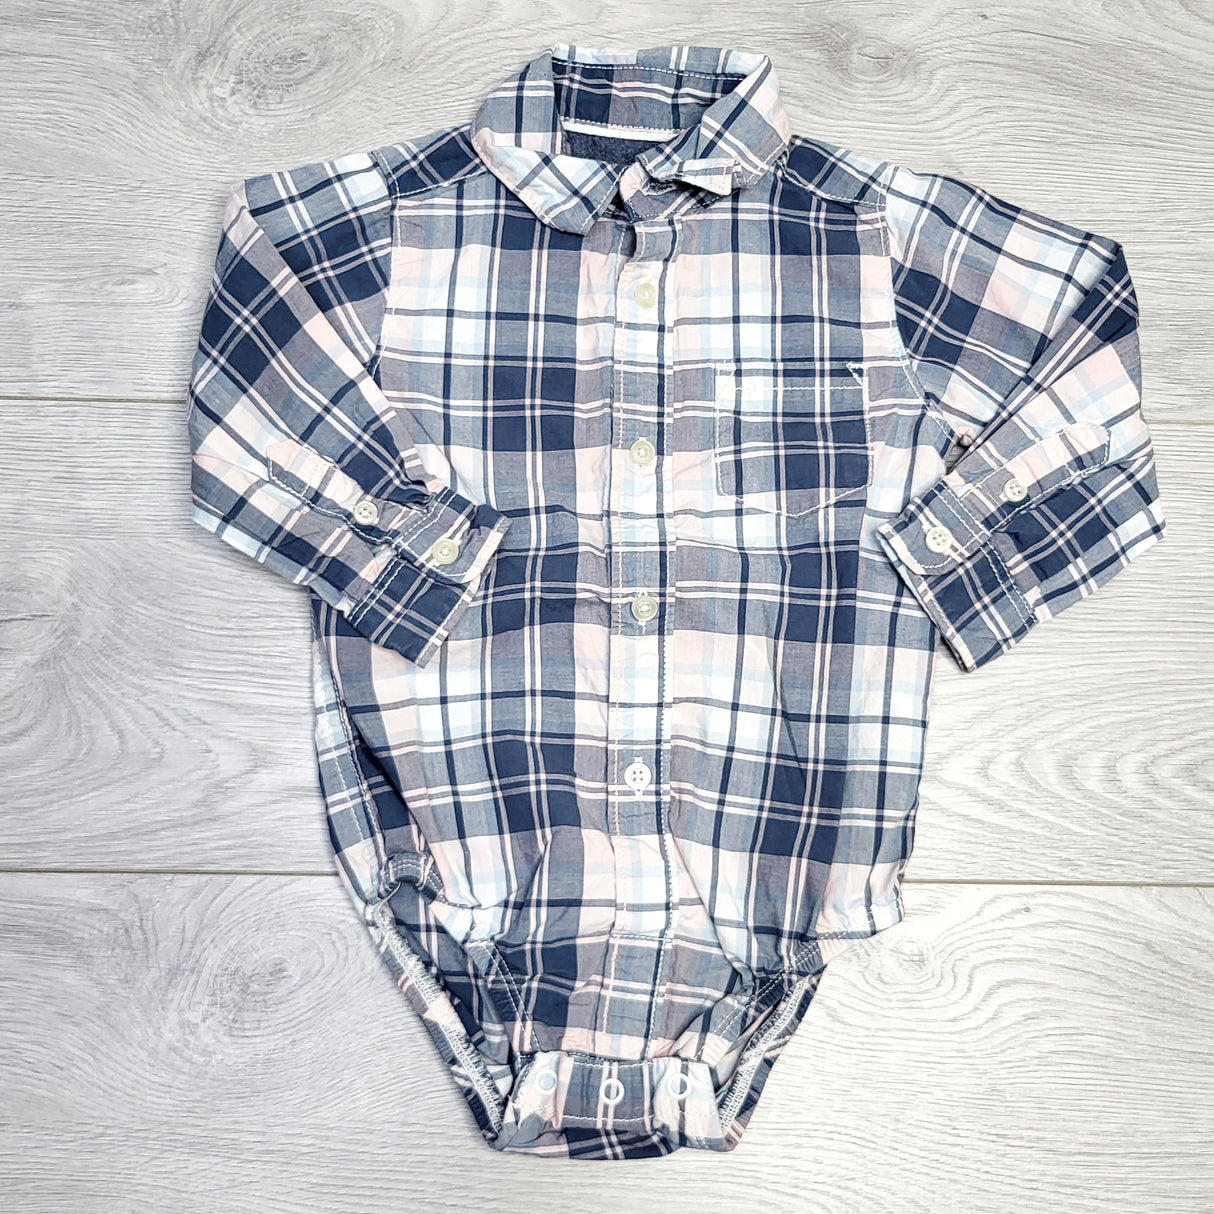 MSNDS11 - Carters pink and blue plaid dress shirt onesie. Size 12 months